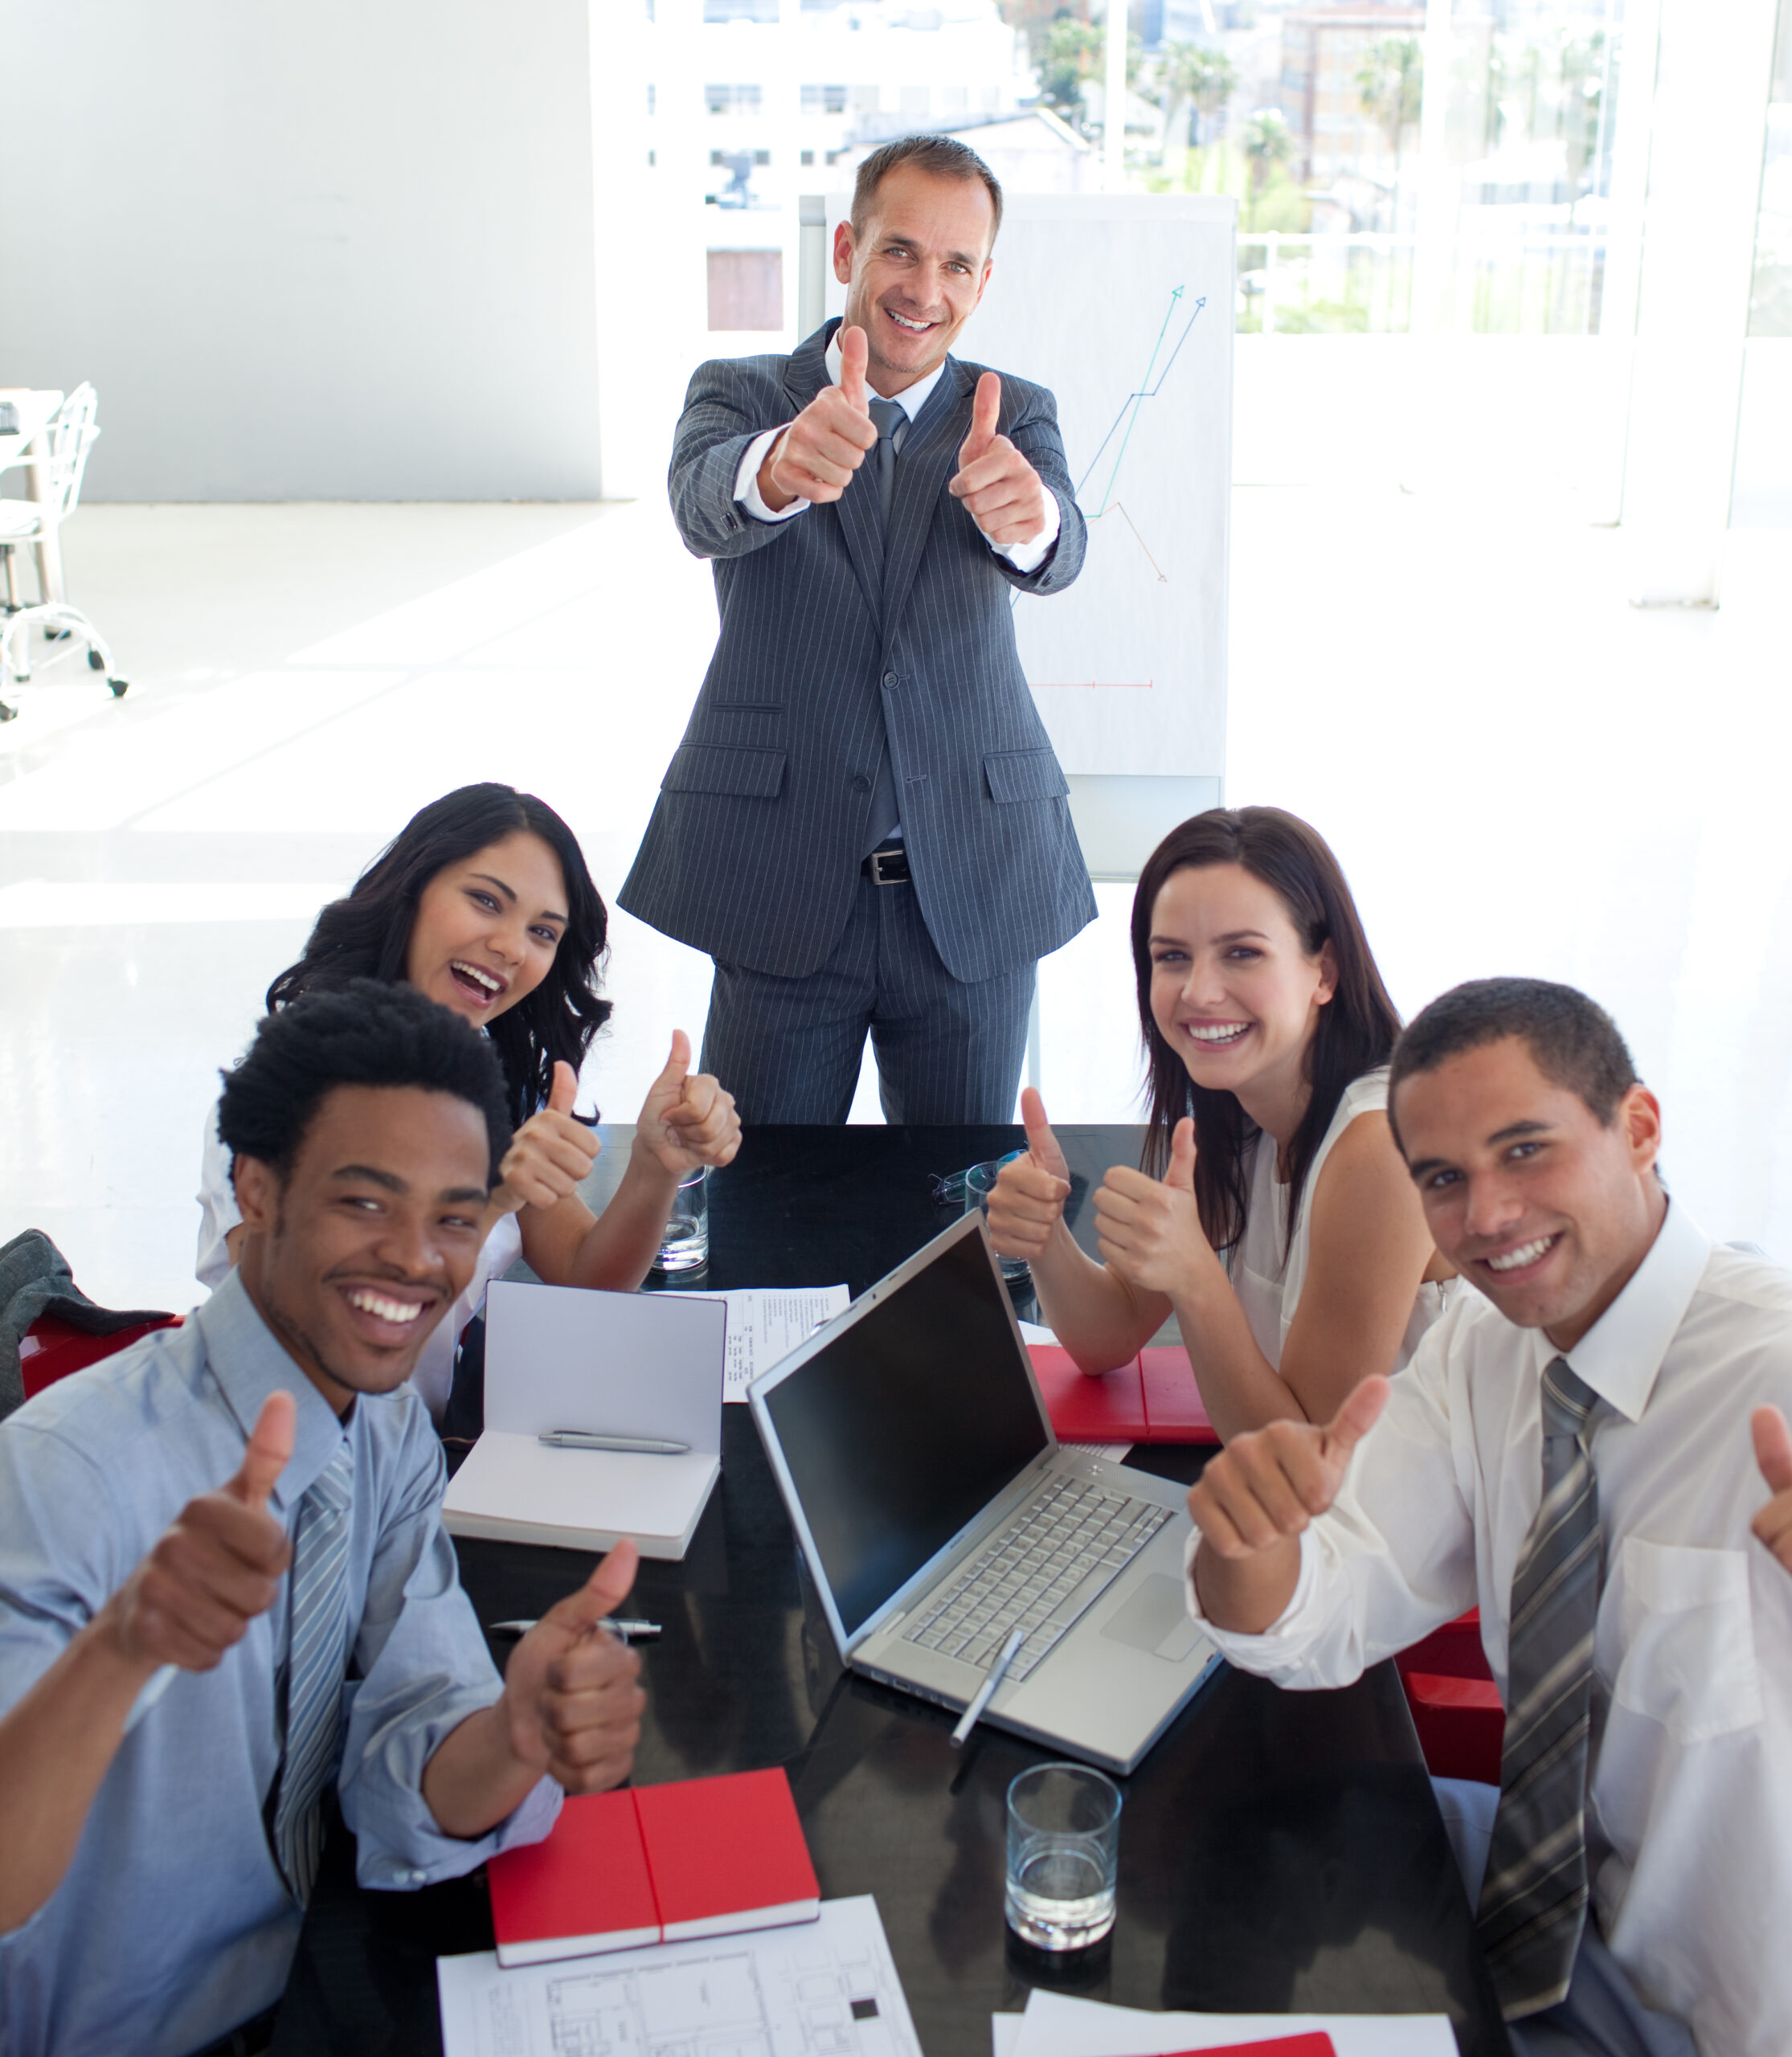 Business team in a meeting with thumbs up